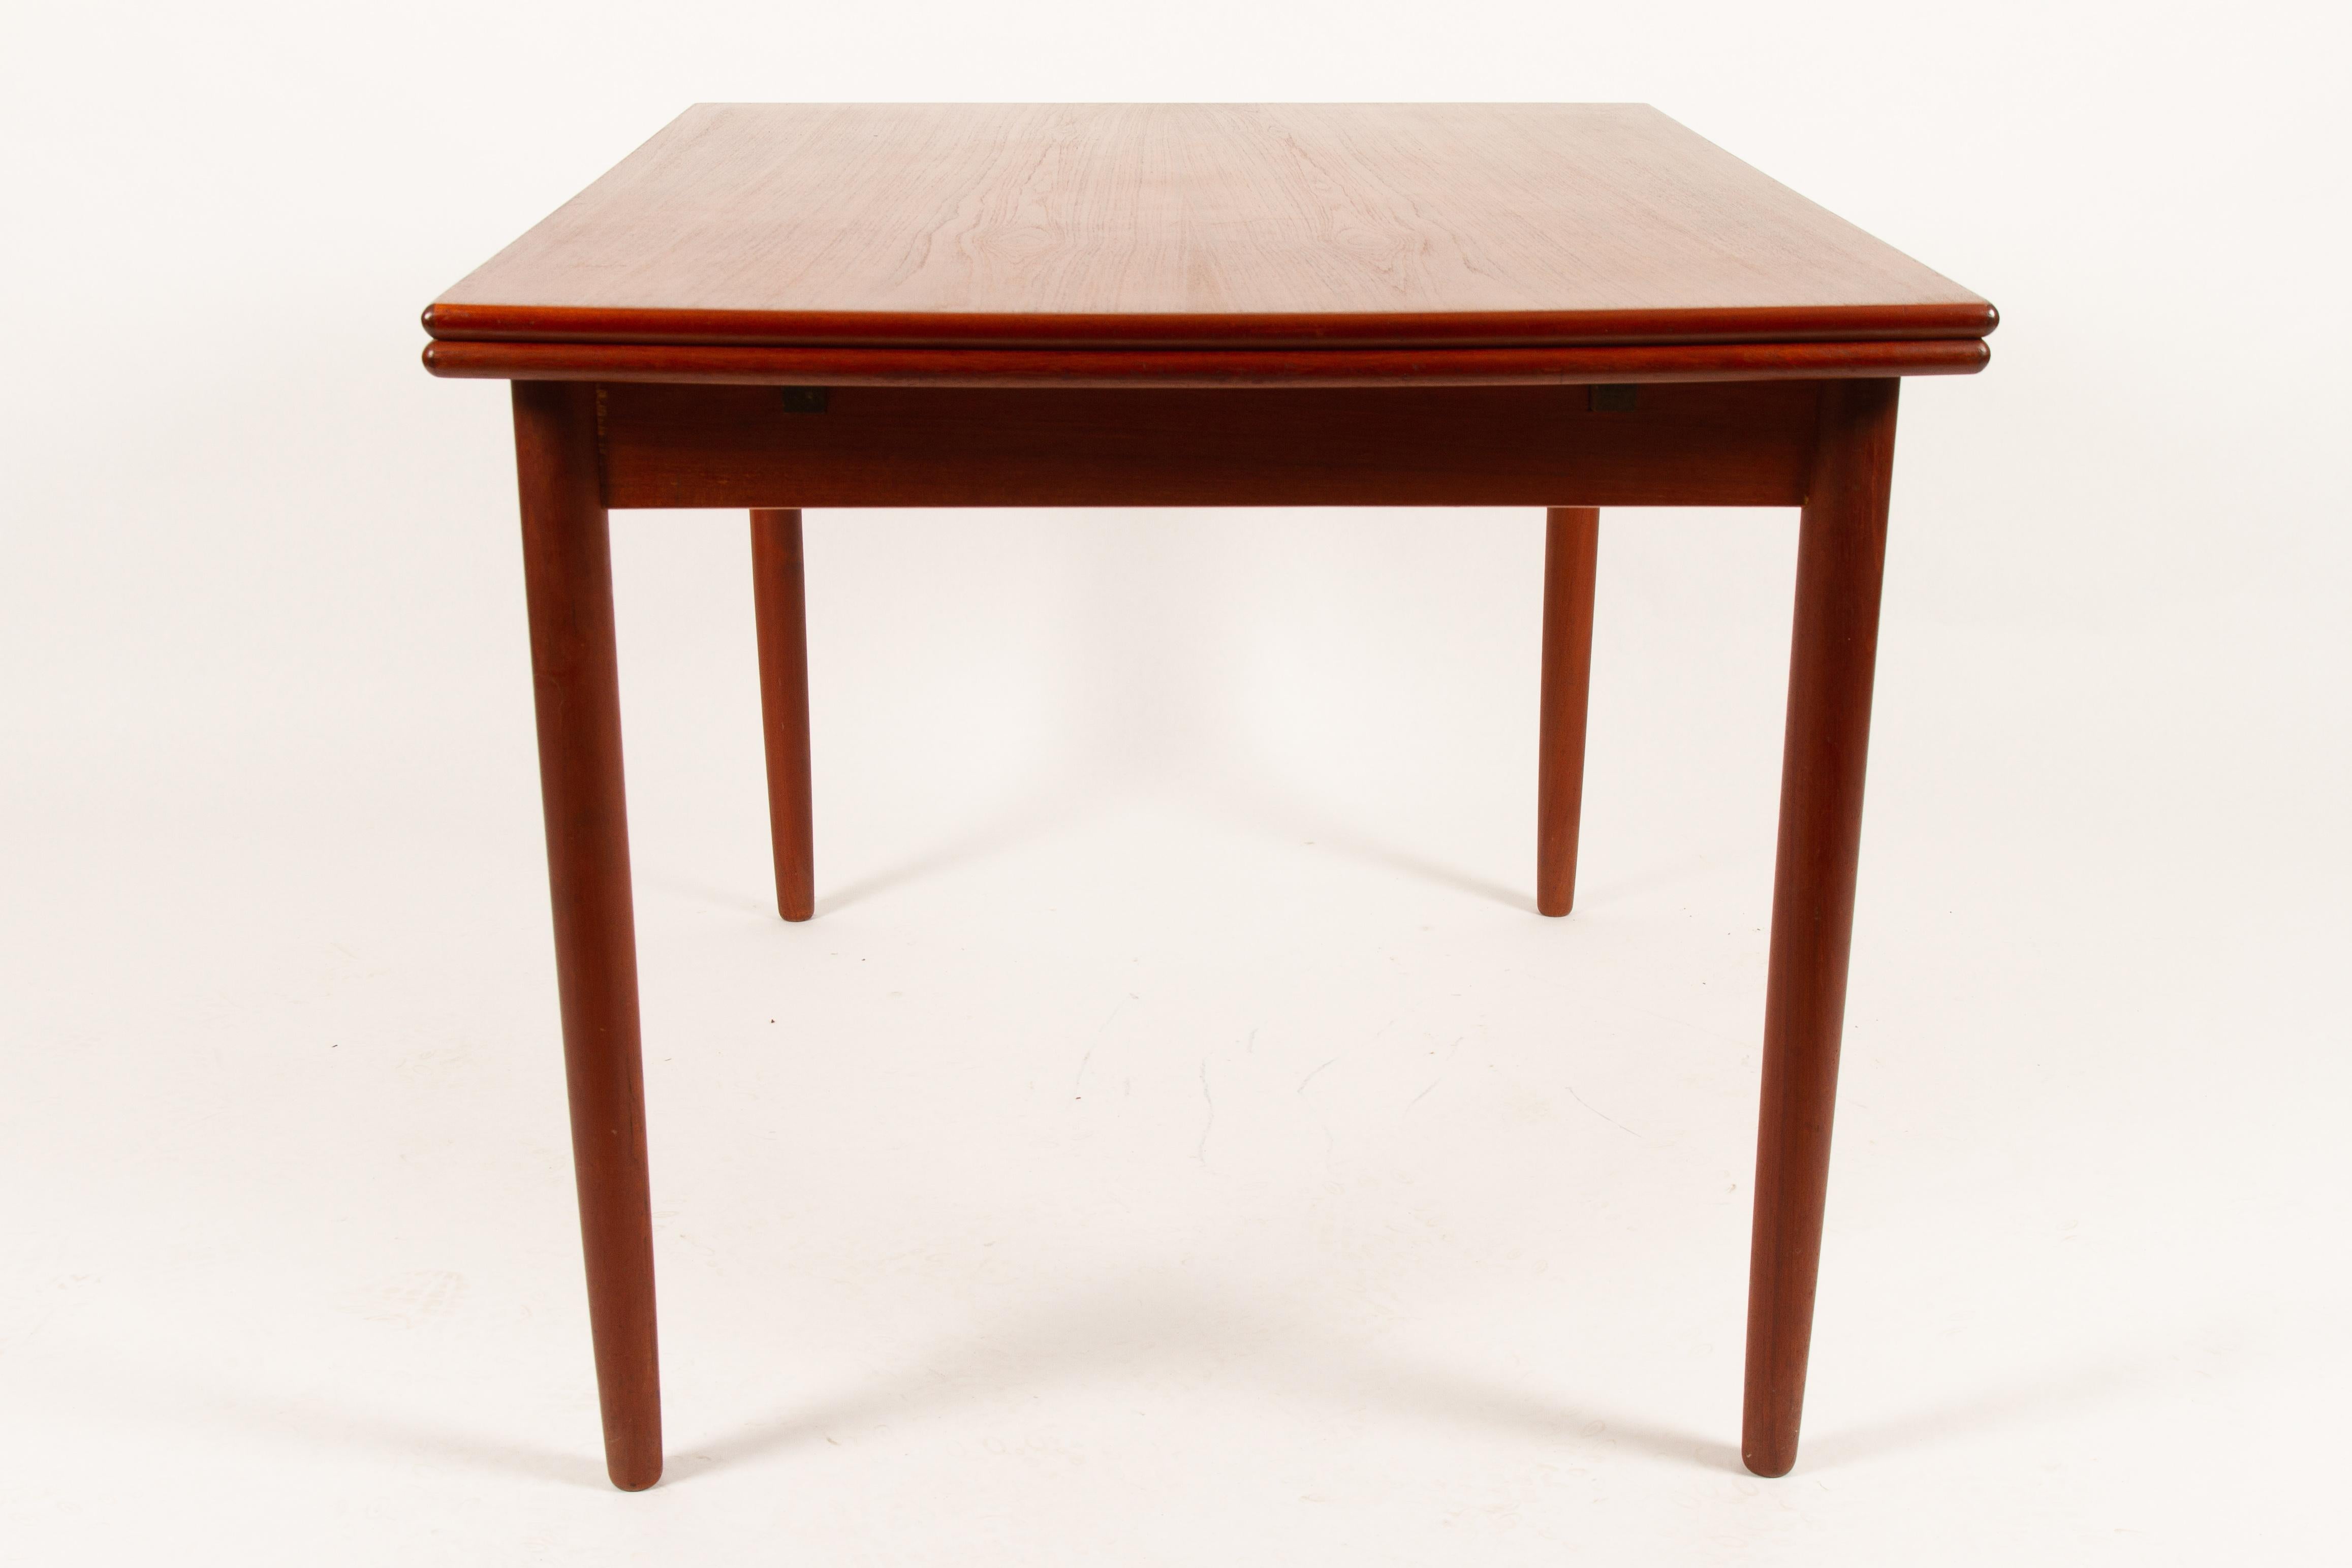 Classic Danish extendable dining table with draw out leaves. Beautiful teak veneer with edges in solid teak. Standing on round tapered legs. Light and elegant, and easy for one person to pullout / pull-out. Very good vintage condition. All surfaces